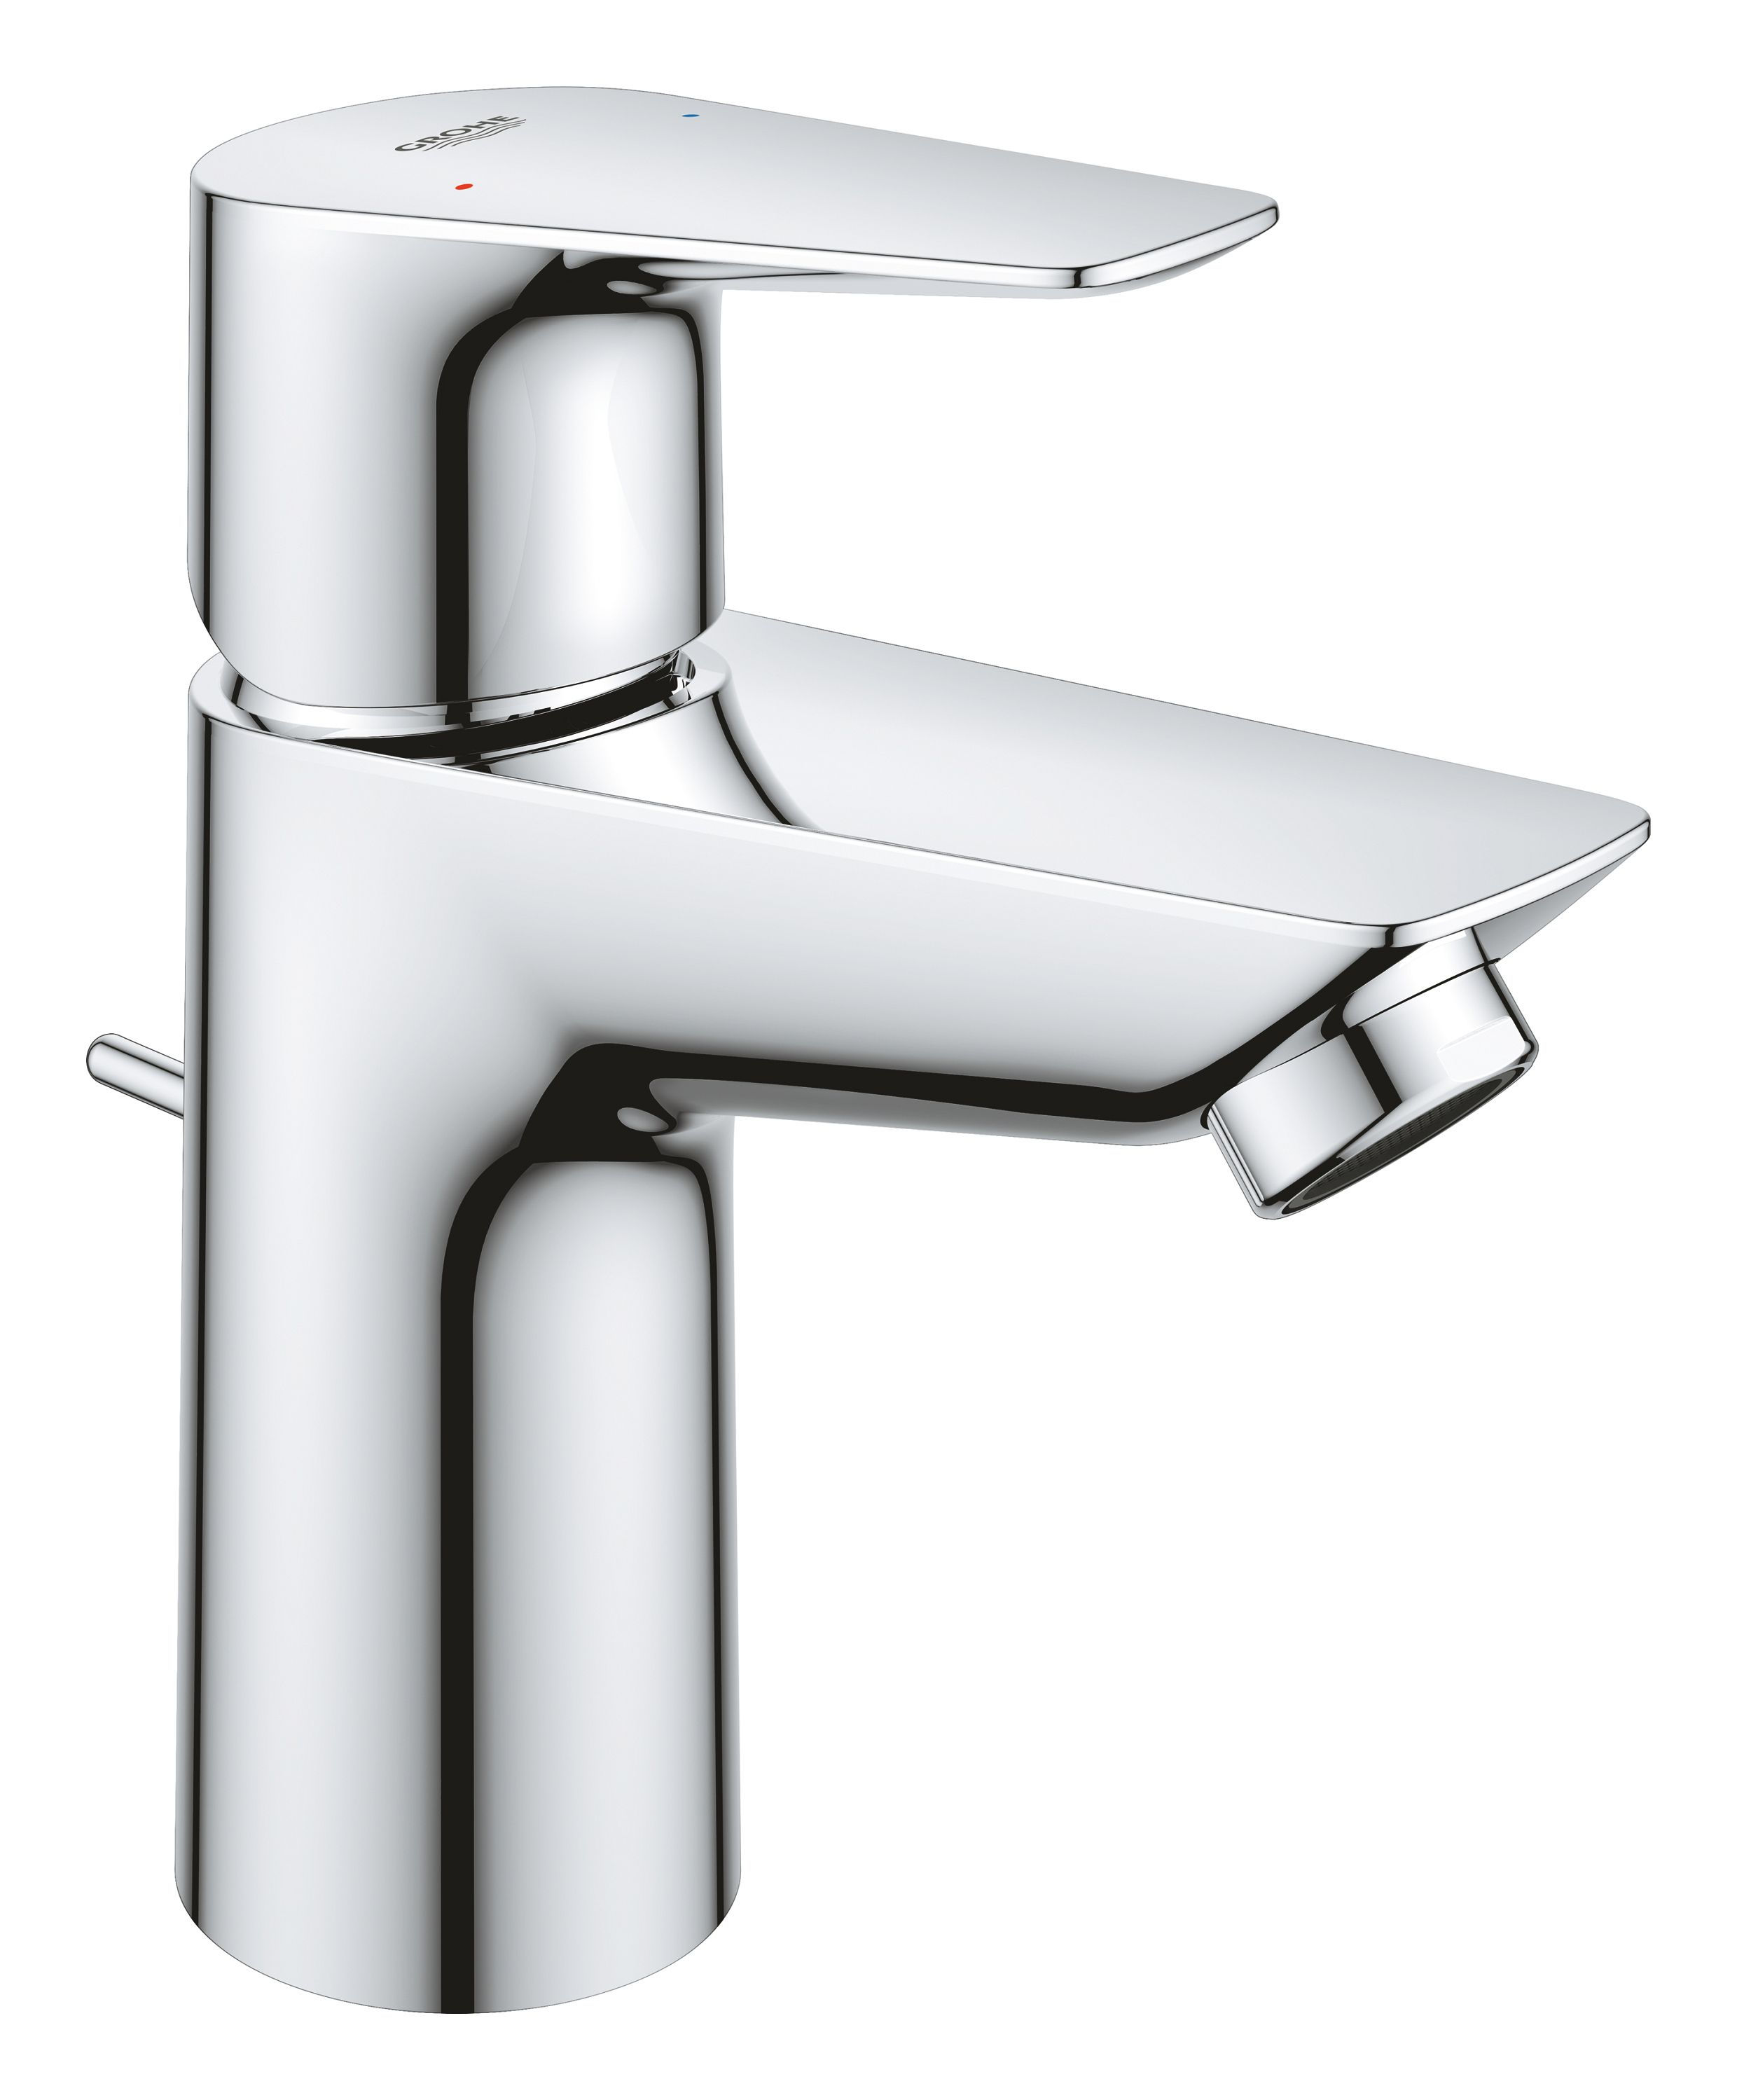 Grohe QuickFix Start Edge Chrome effect Deck-mounted Manual Basin Mono mixer Tap with Pop-up waste